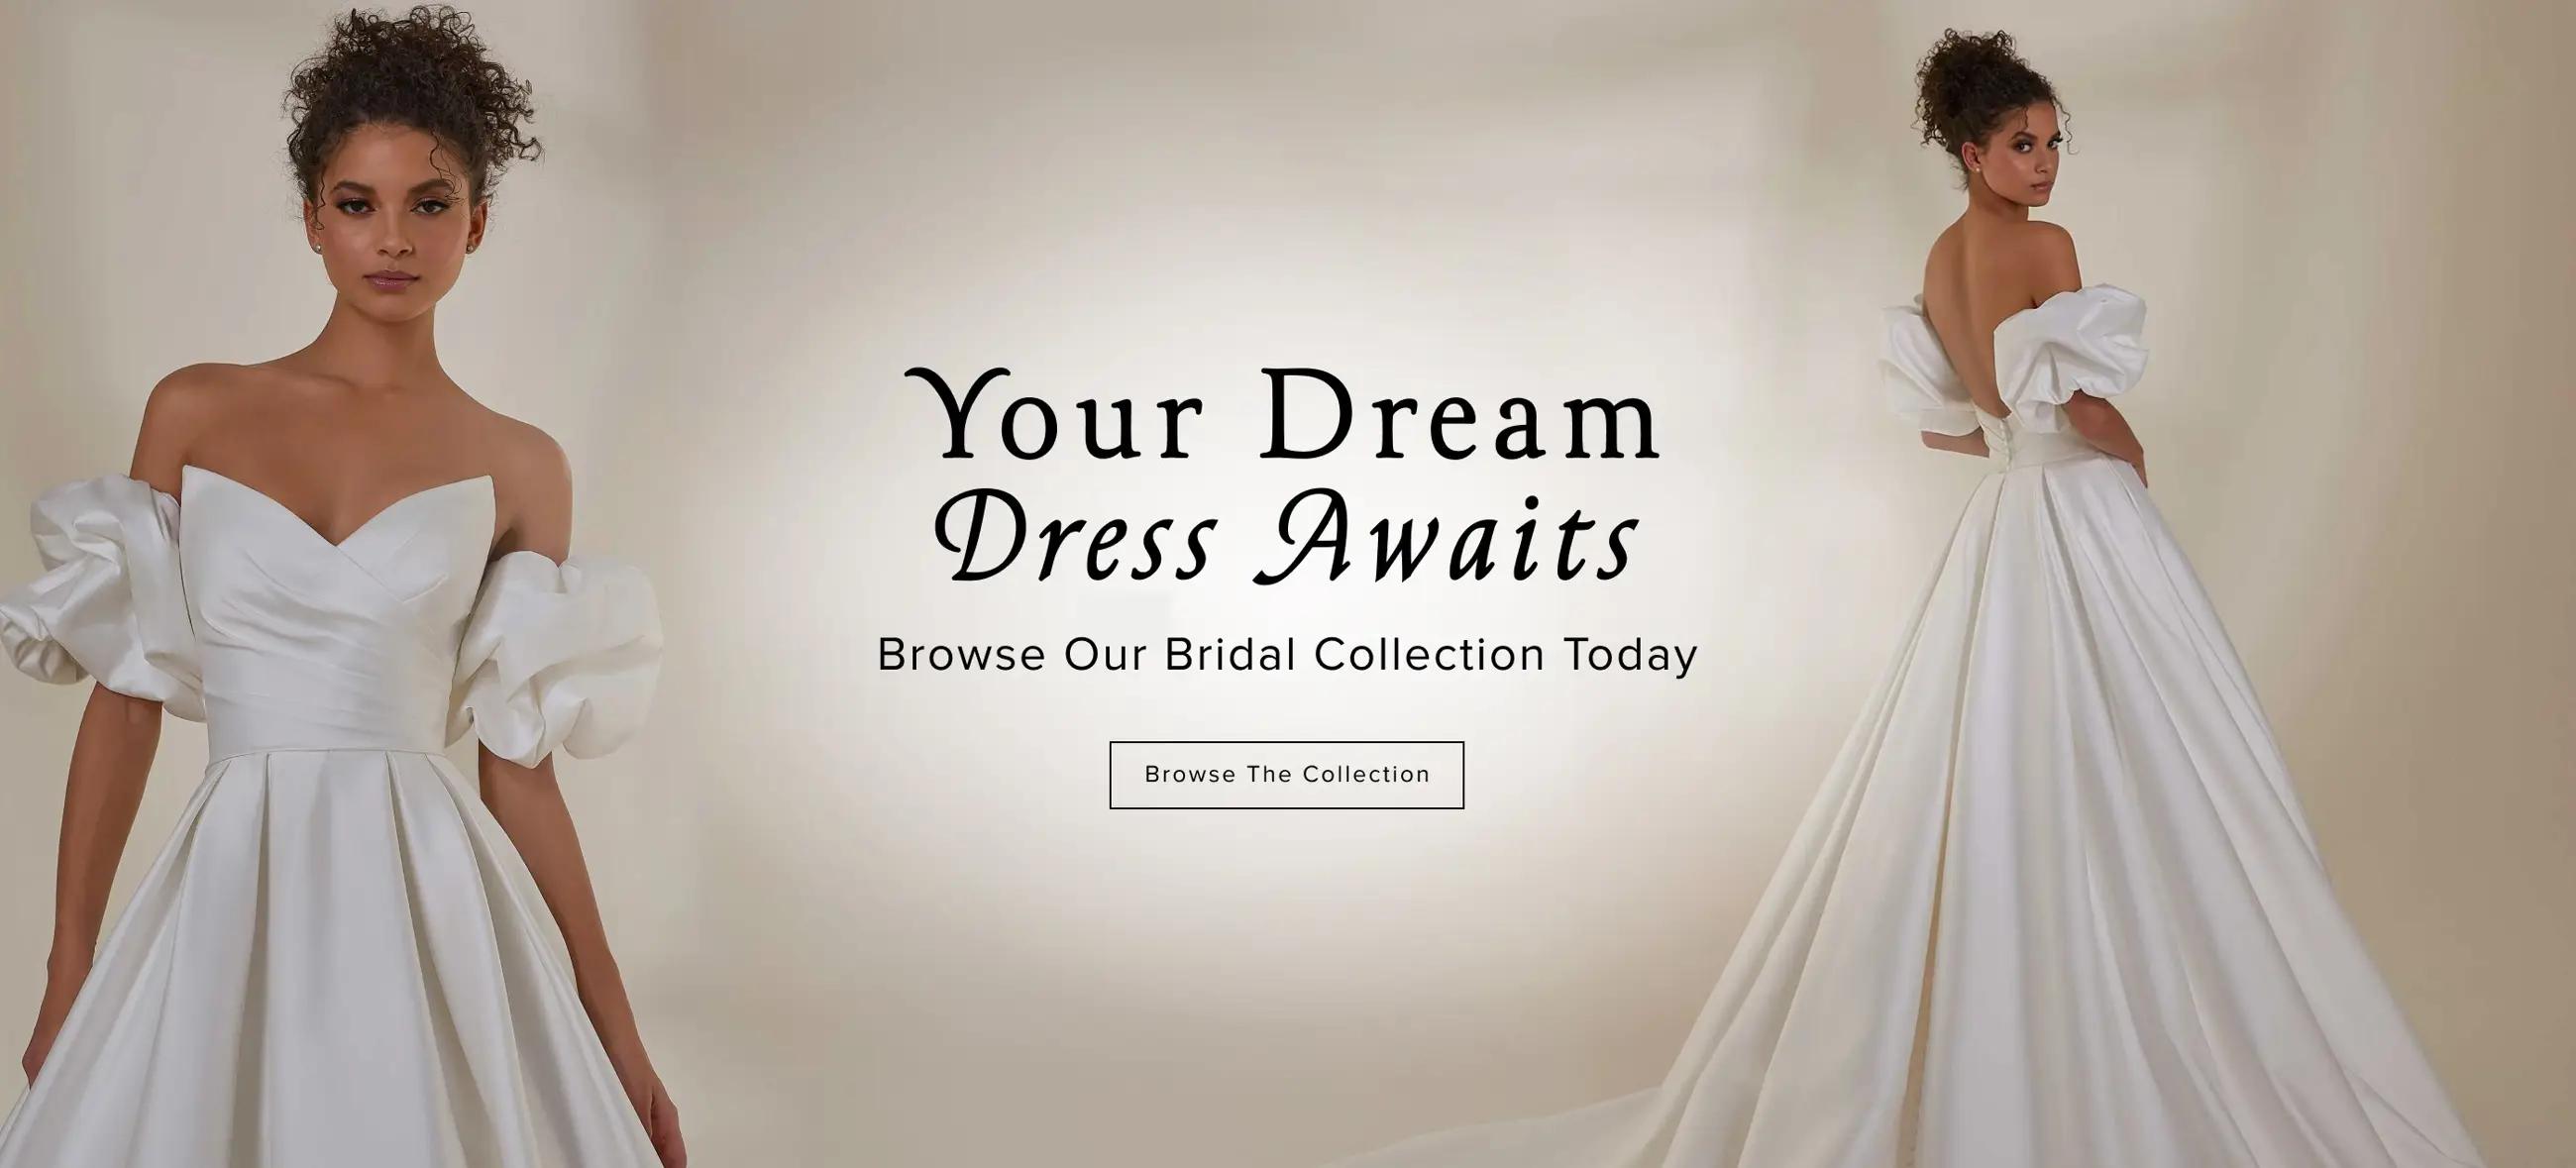 Your dream dress awaits, browse bridal banner.